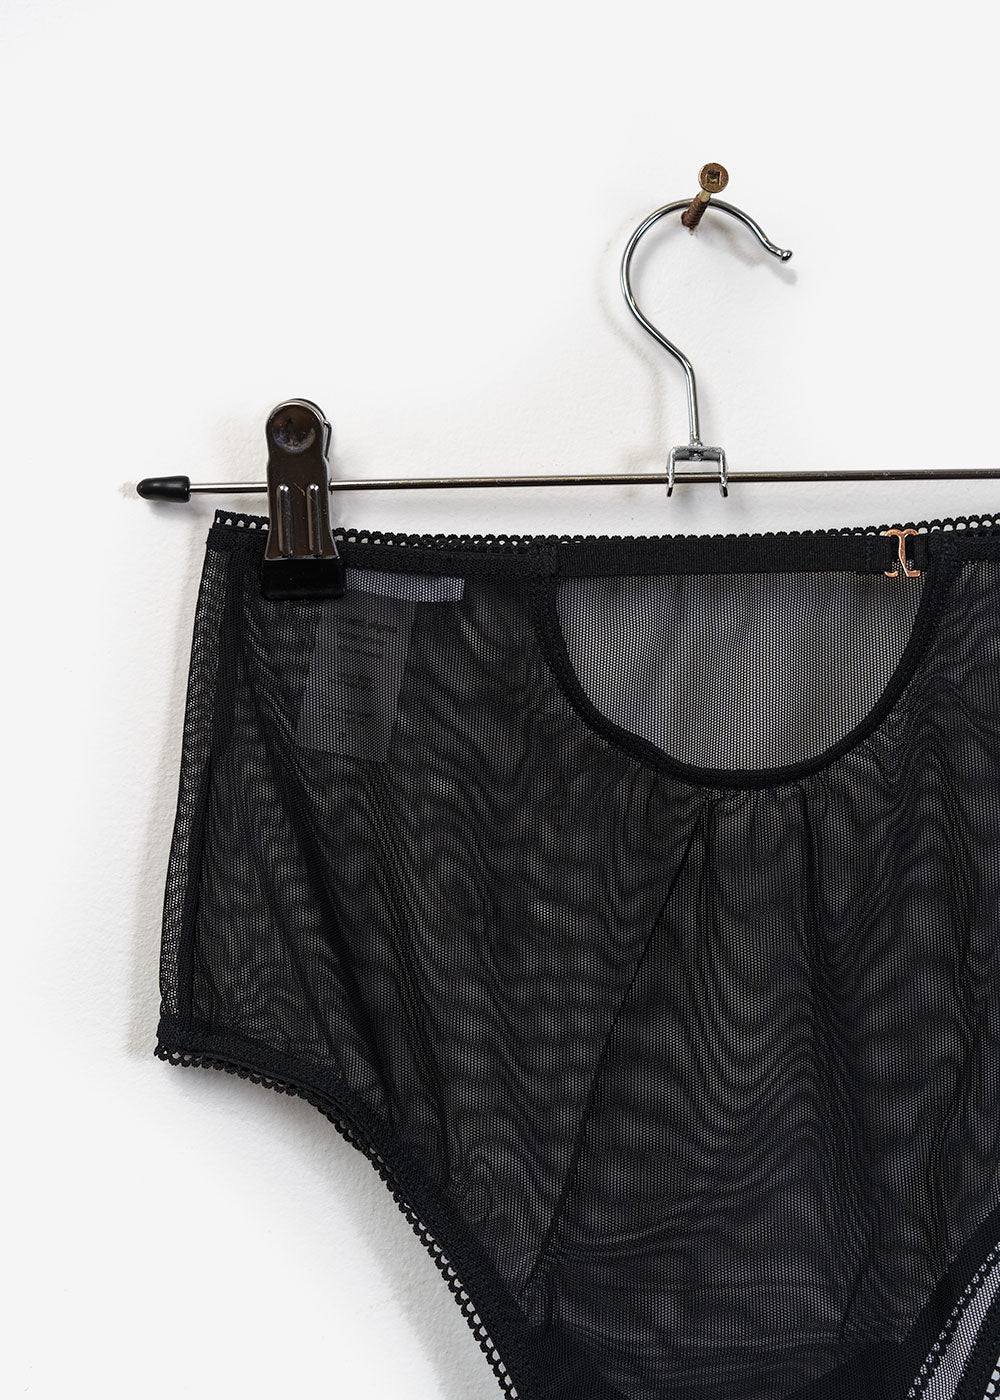 Angie Bauer Shiso Panties - New Classics Studios Sustainable Ethical Fashion Canada